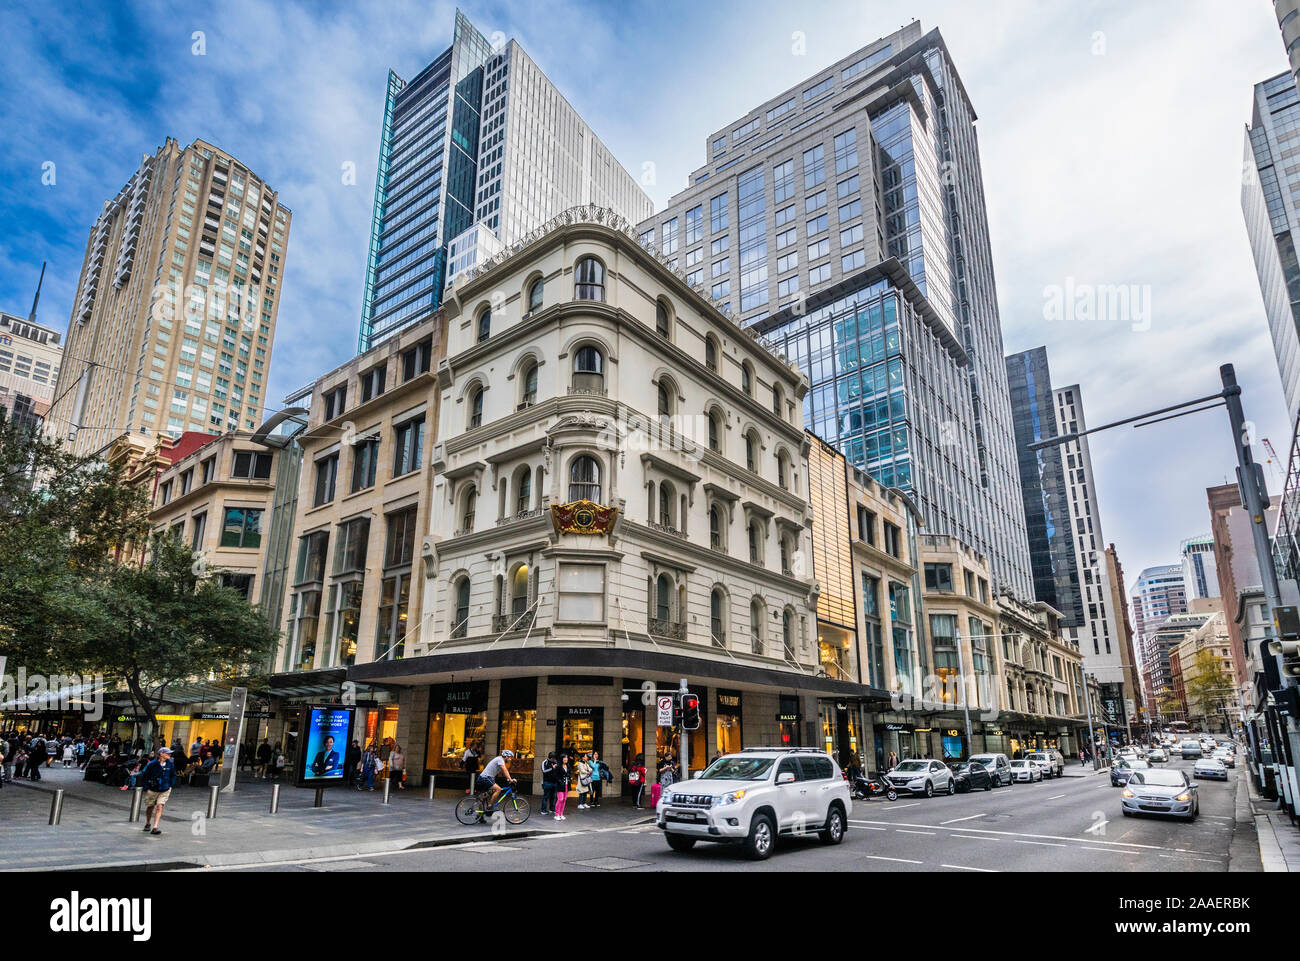 intersection of King and Pitt Street in the heart of the Sydney CBD, New South Wales, Australia Stock Photo